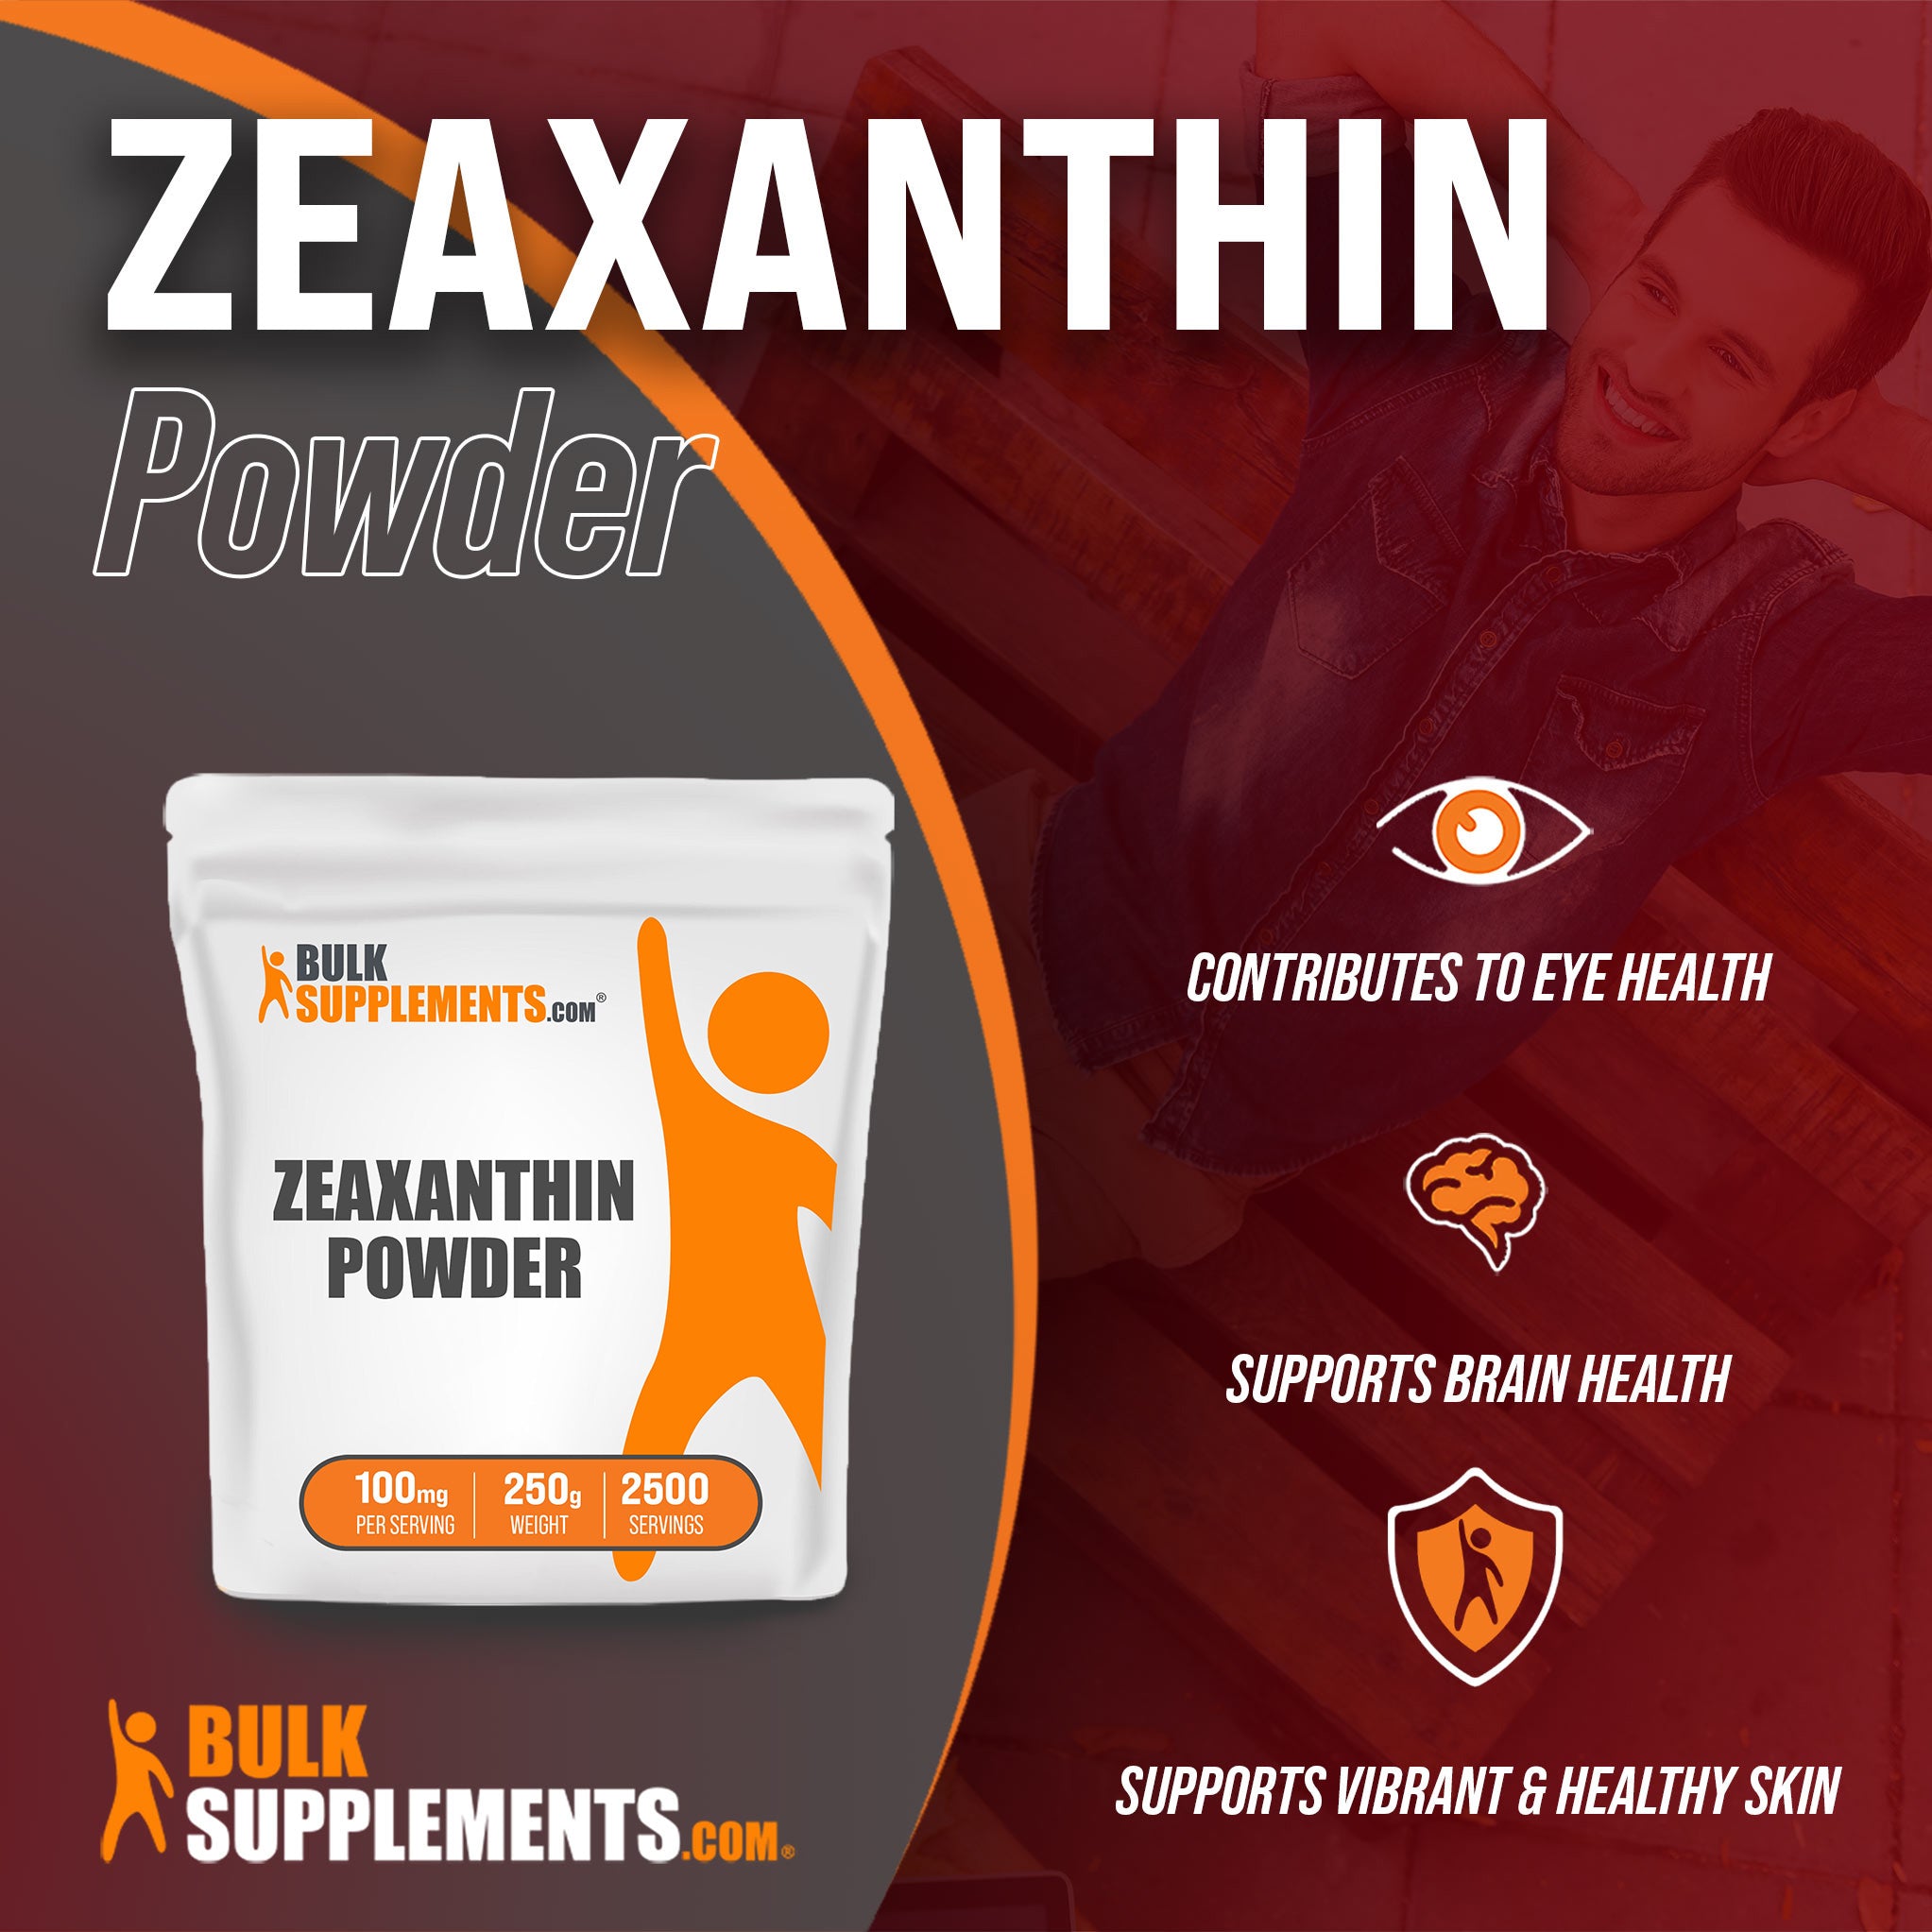 Benefits of Zeaxanthin Powder: contributes to eye health, supports brain health, supports vibrant and healthy skin